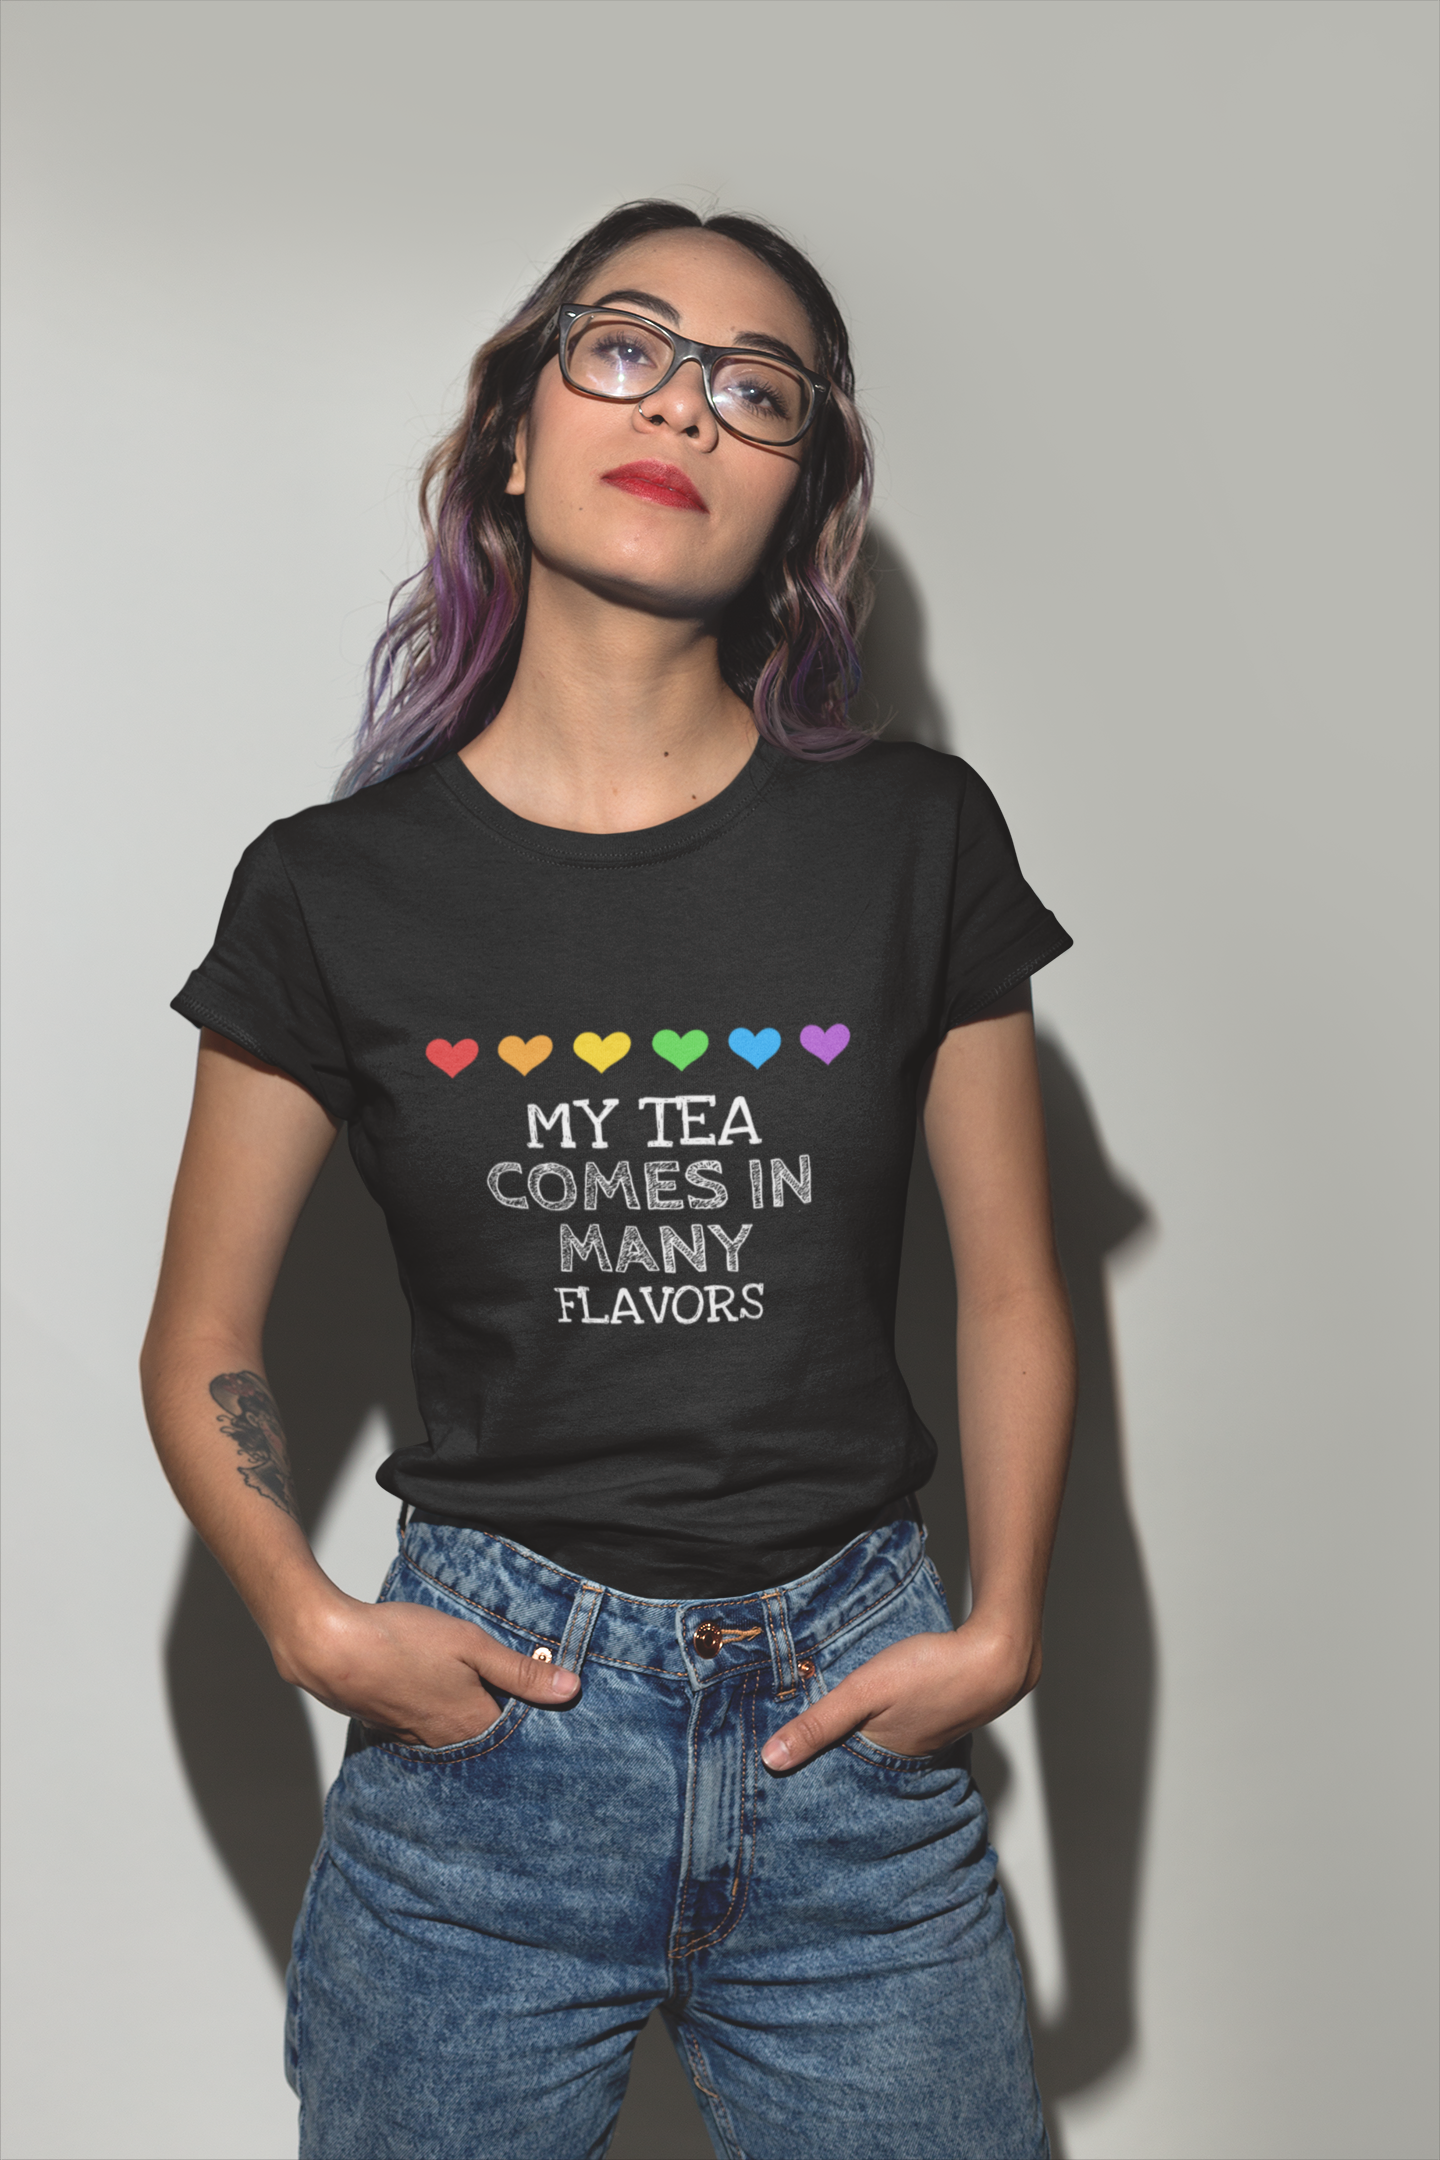 hispanic-woman-with-purple-hair-wearing-a-t-shirt-mockup-in-a-photo-studio-a18717 (2).png